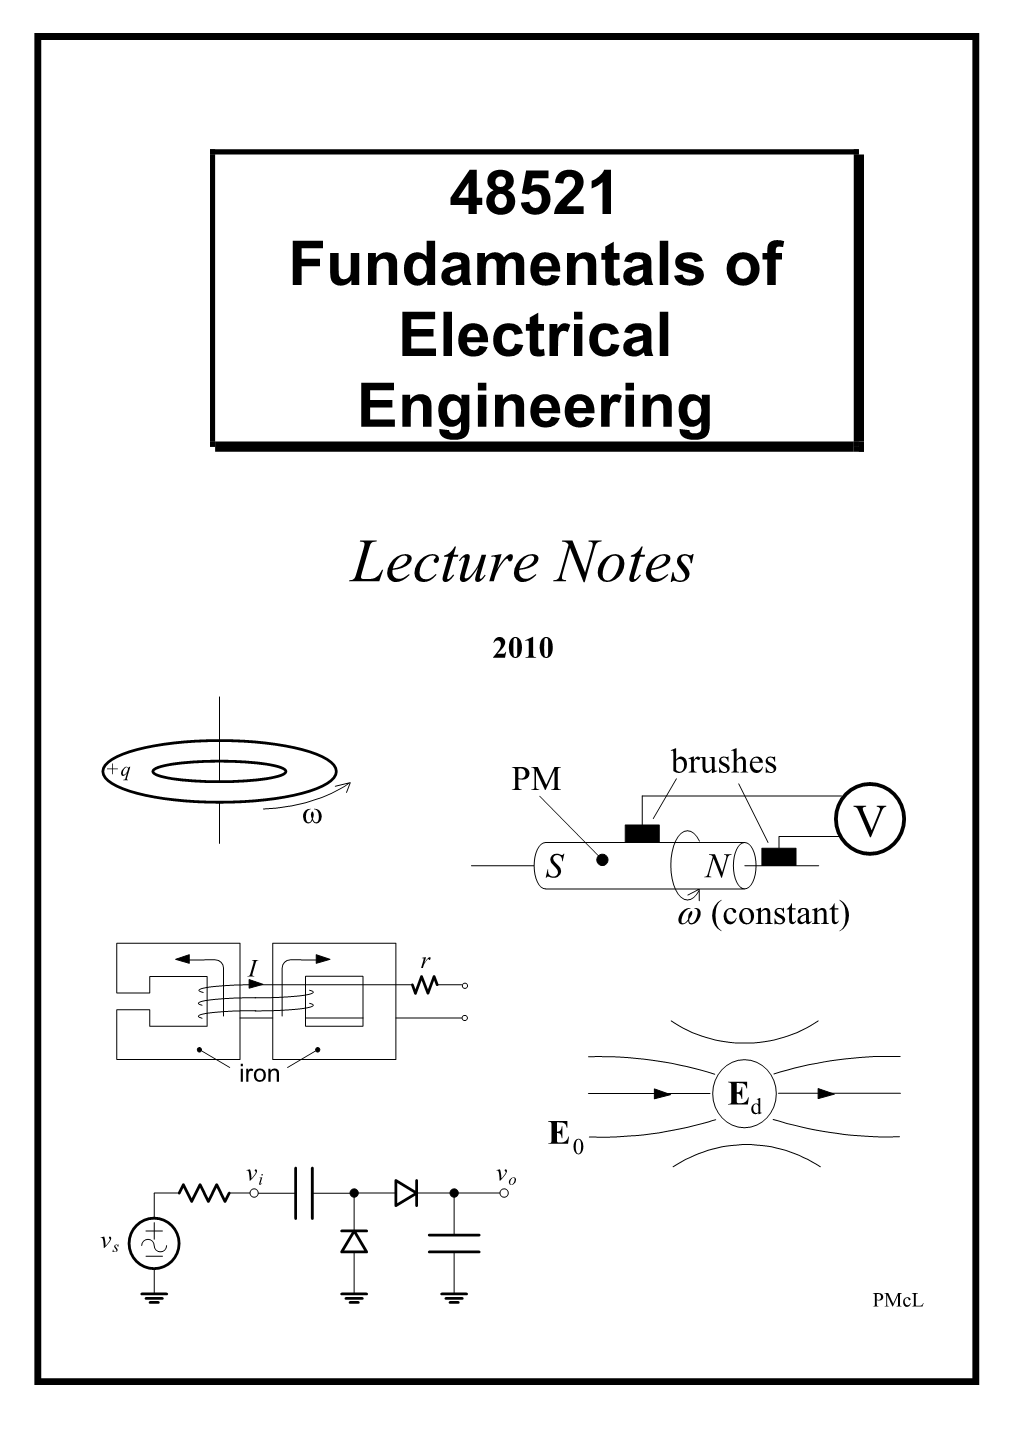 48521 Fundamentals of Electrical Engineering Lecture Notes